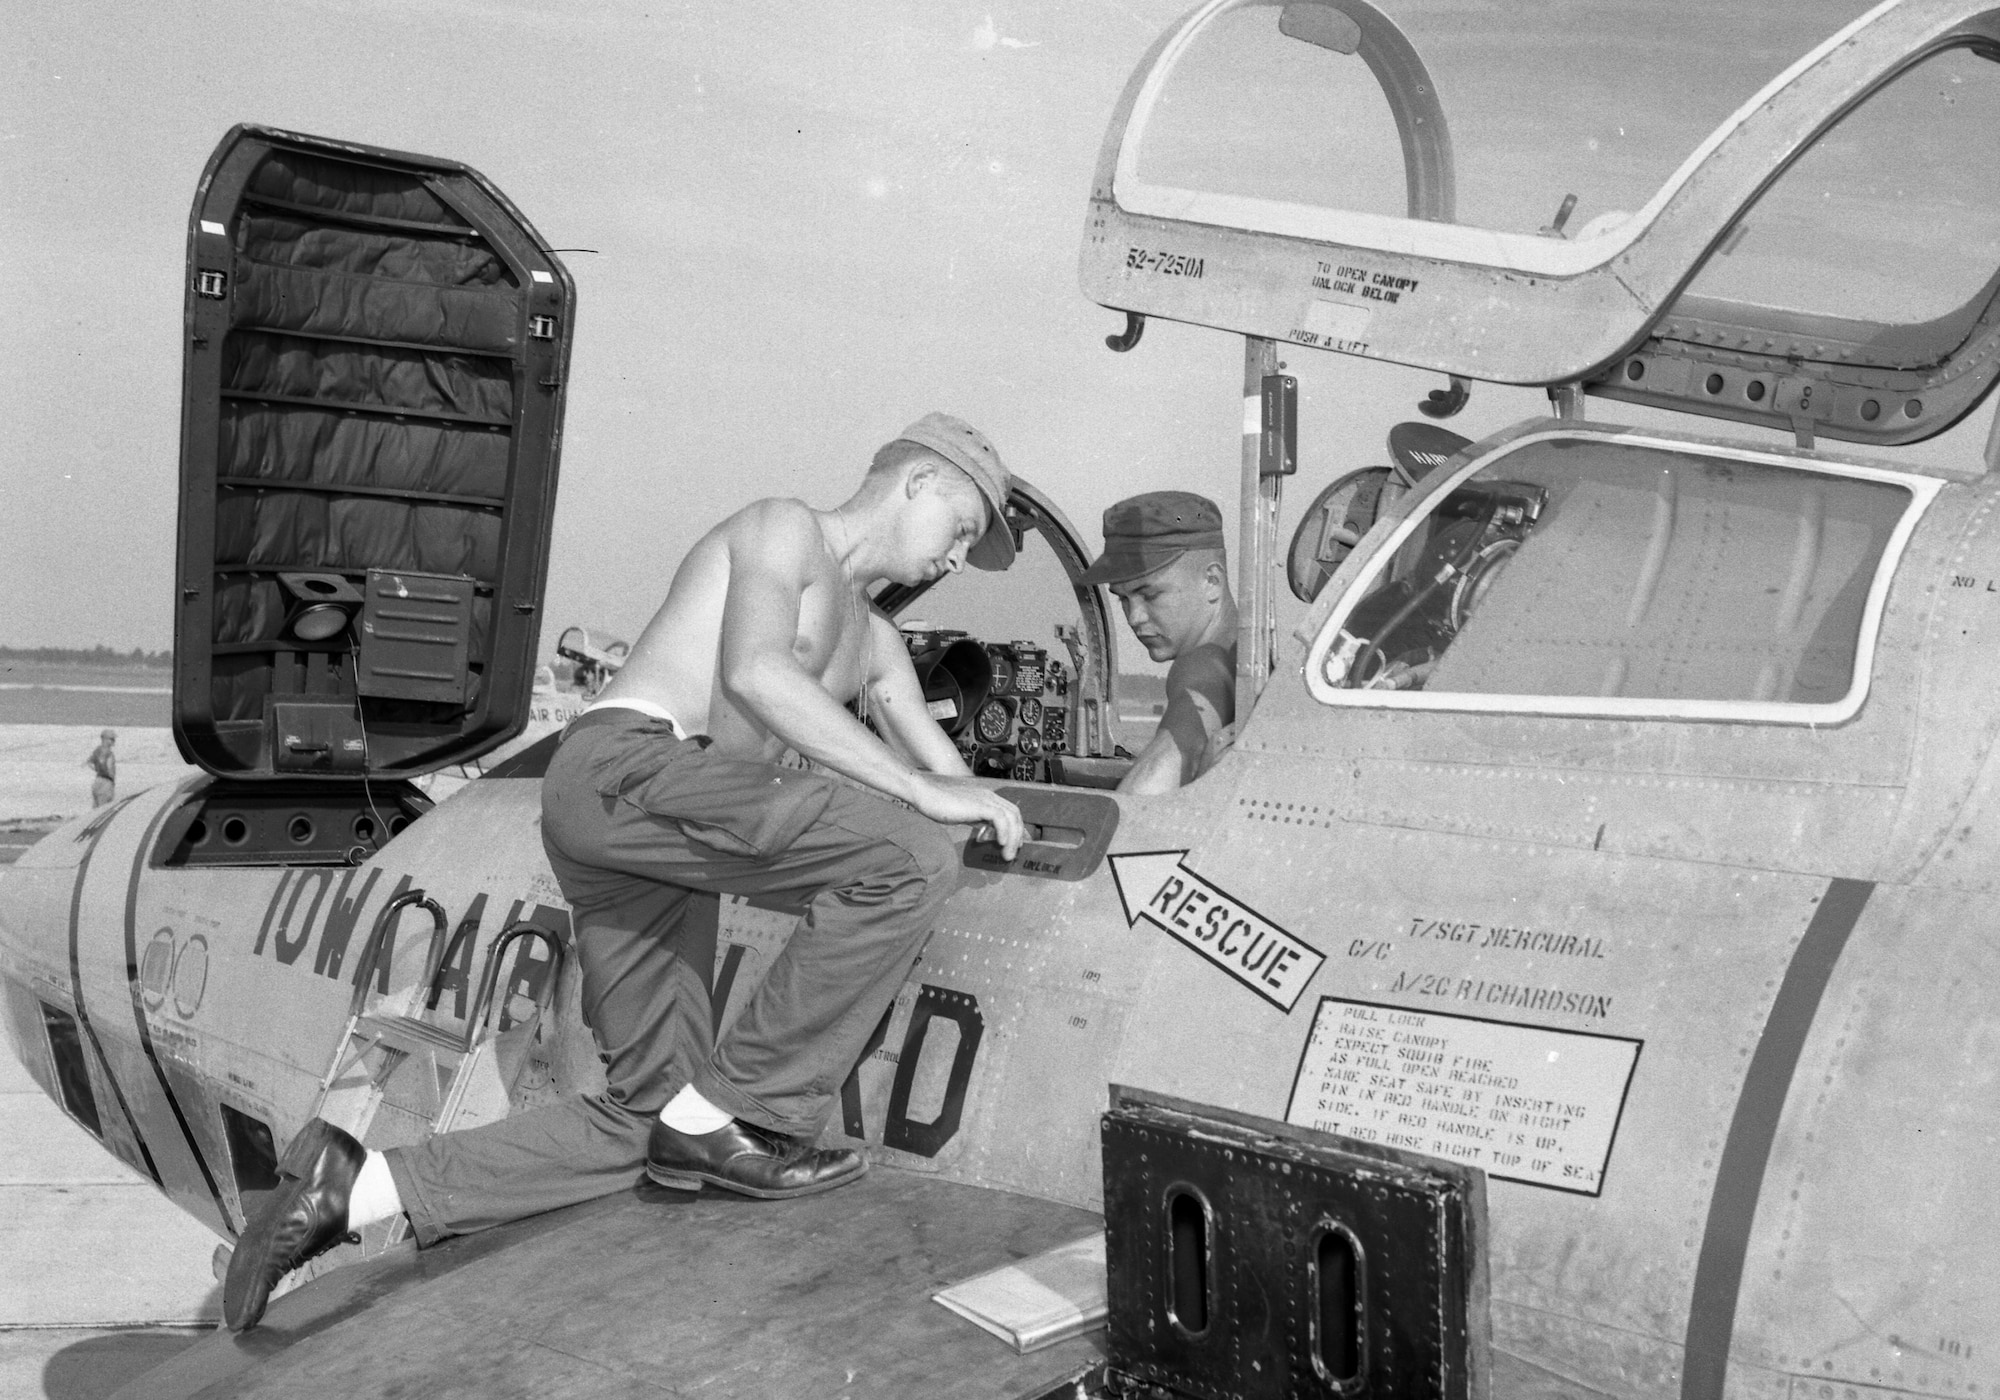 Airman from the 174th Tactical Reconnaissance Squadron performing general operational maintenance on a RF-84 while on the flight line in Sioux City, Iowa during the summer of 1959. The door on the front of the aircraft allowed airman to access a large compartment where photo equipment was installed and used as part of the reconnaissance mission.
Iowa Air Guard Photo